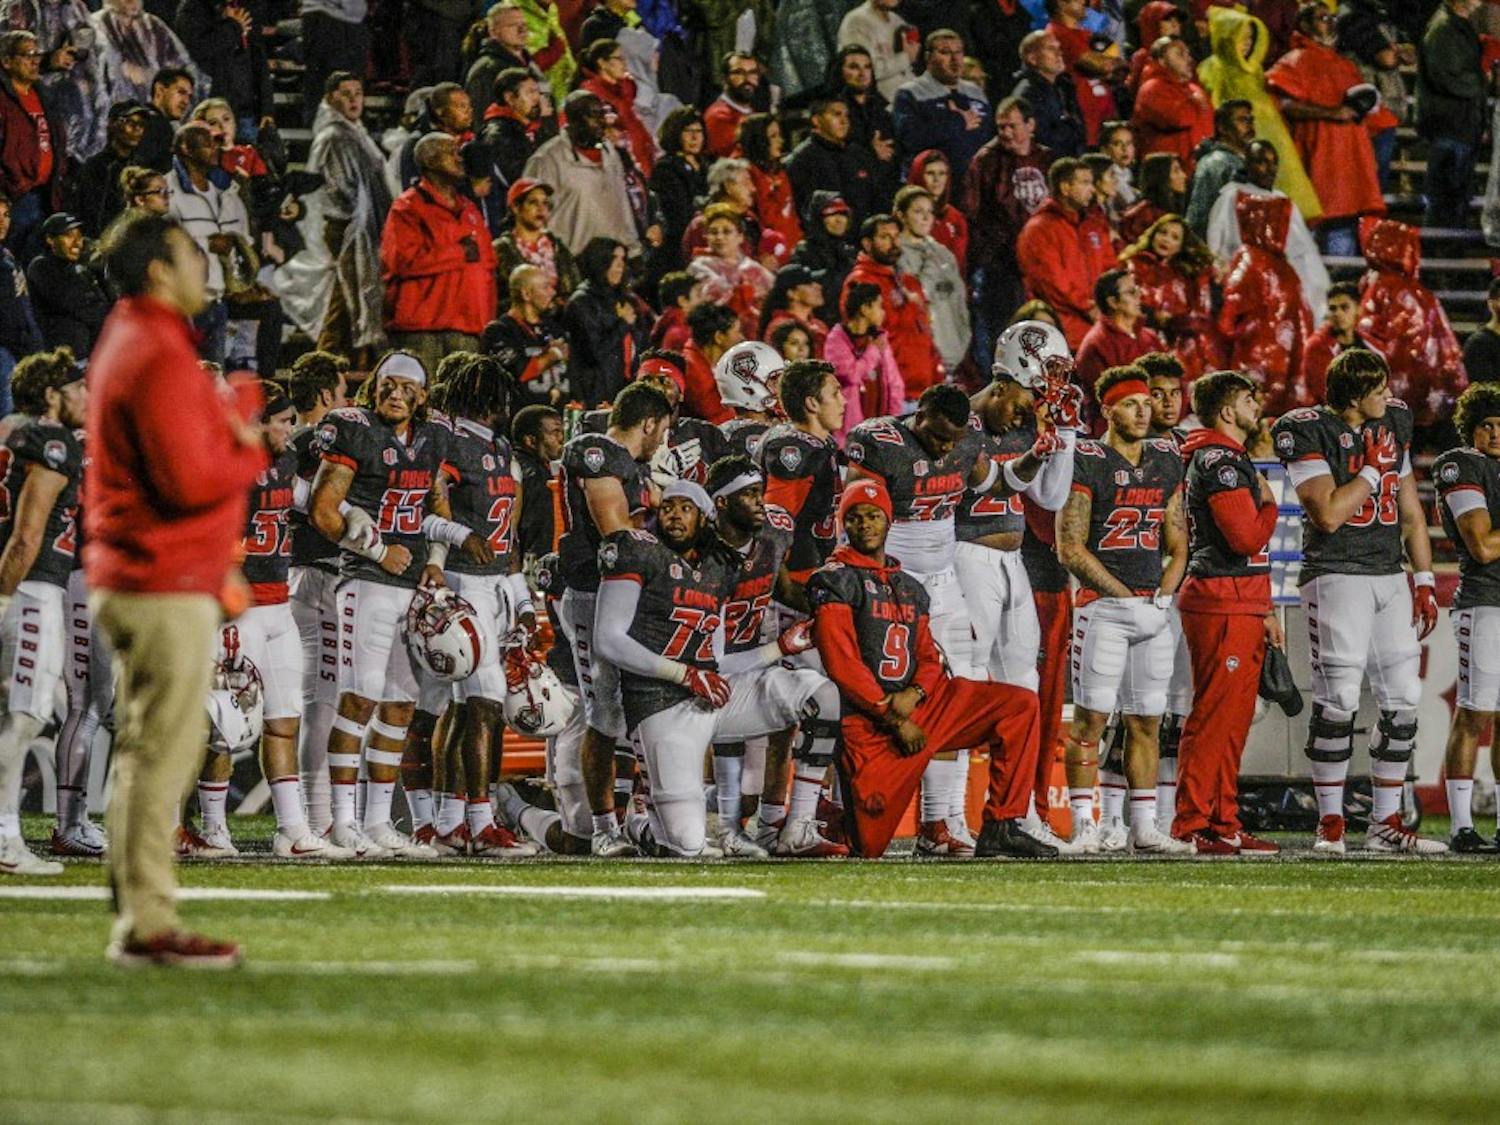 A few Lobo football players take a knee during the national anthem held during the abbreviated half-time at the Lobo vs. U.S. Air Force Academy at Dreamstyle Stadium, Saturday, Sept. 29, 2017.  Weather-induced game delays postponed the national anthem until halftime during Saturday night's match-up.